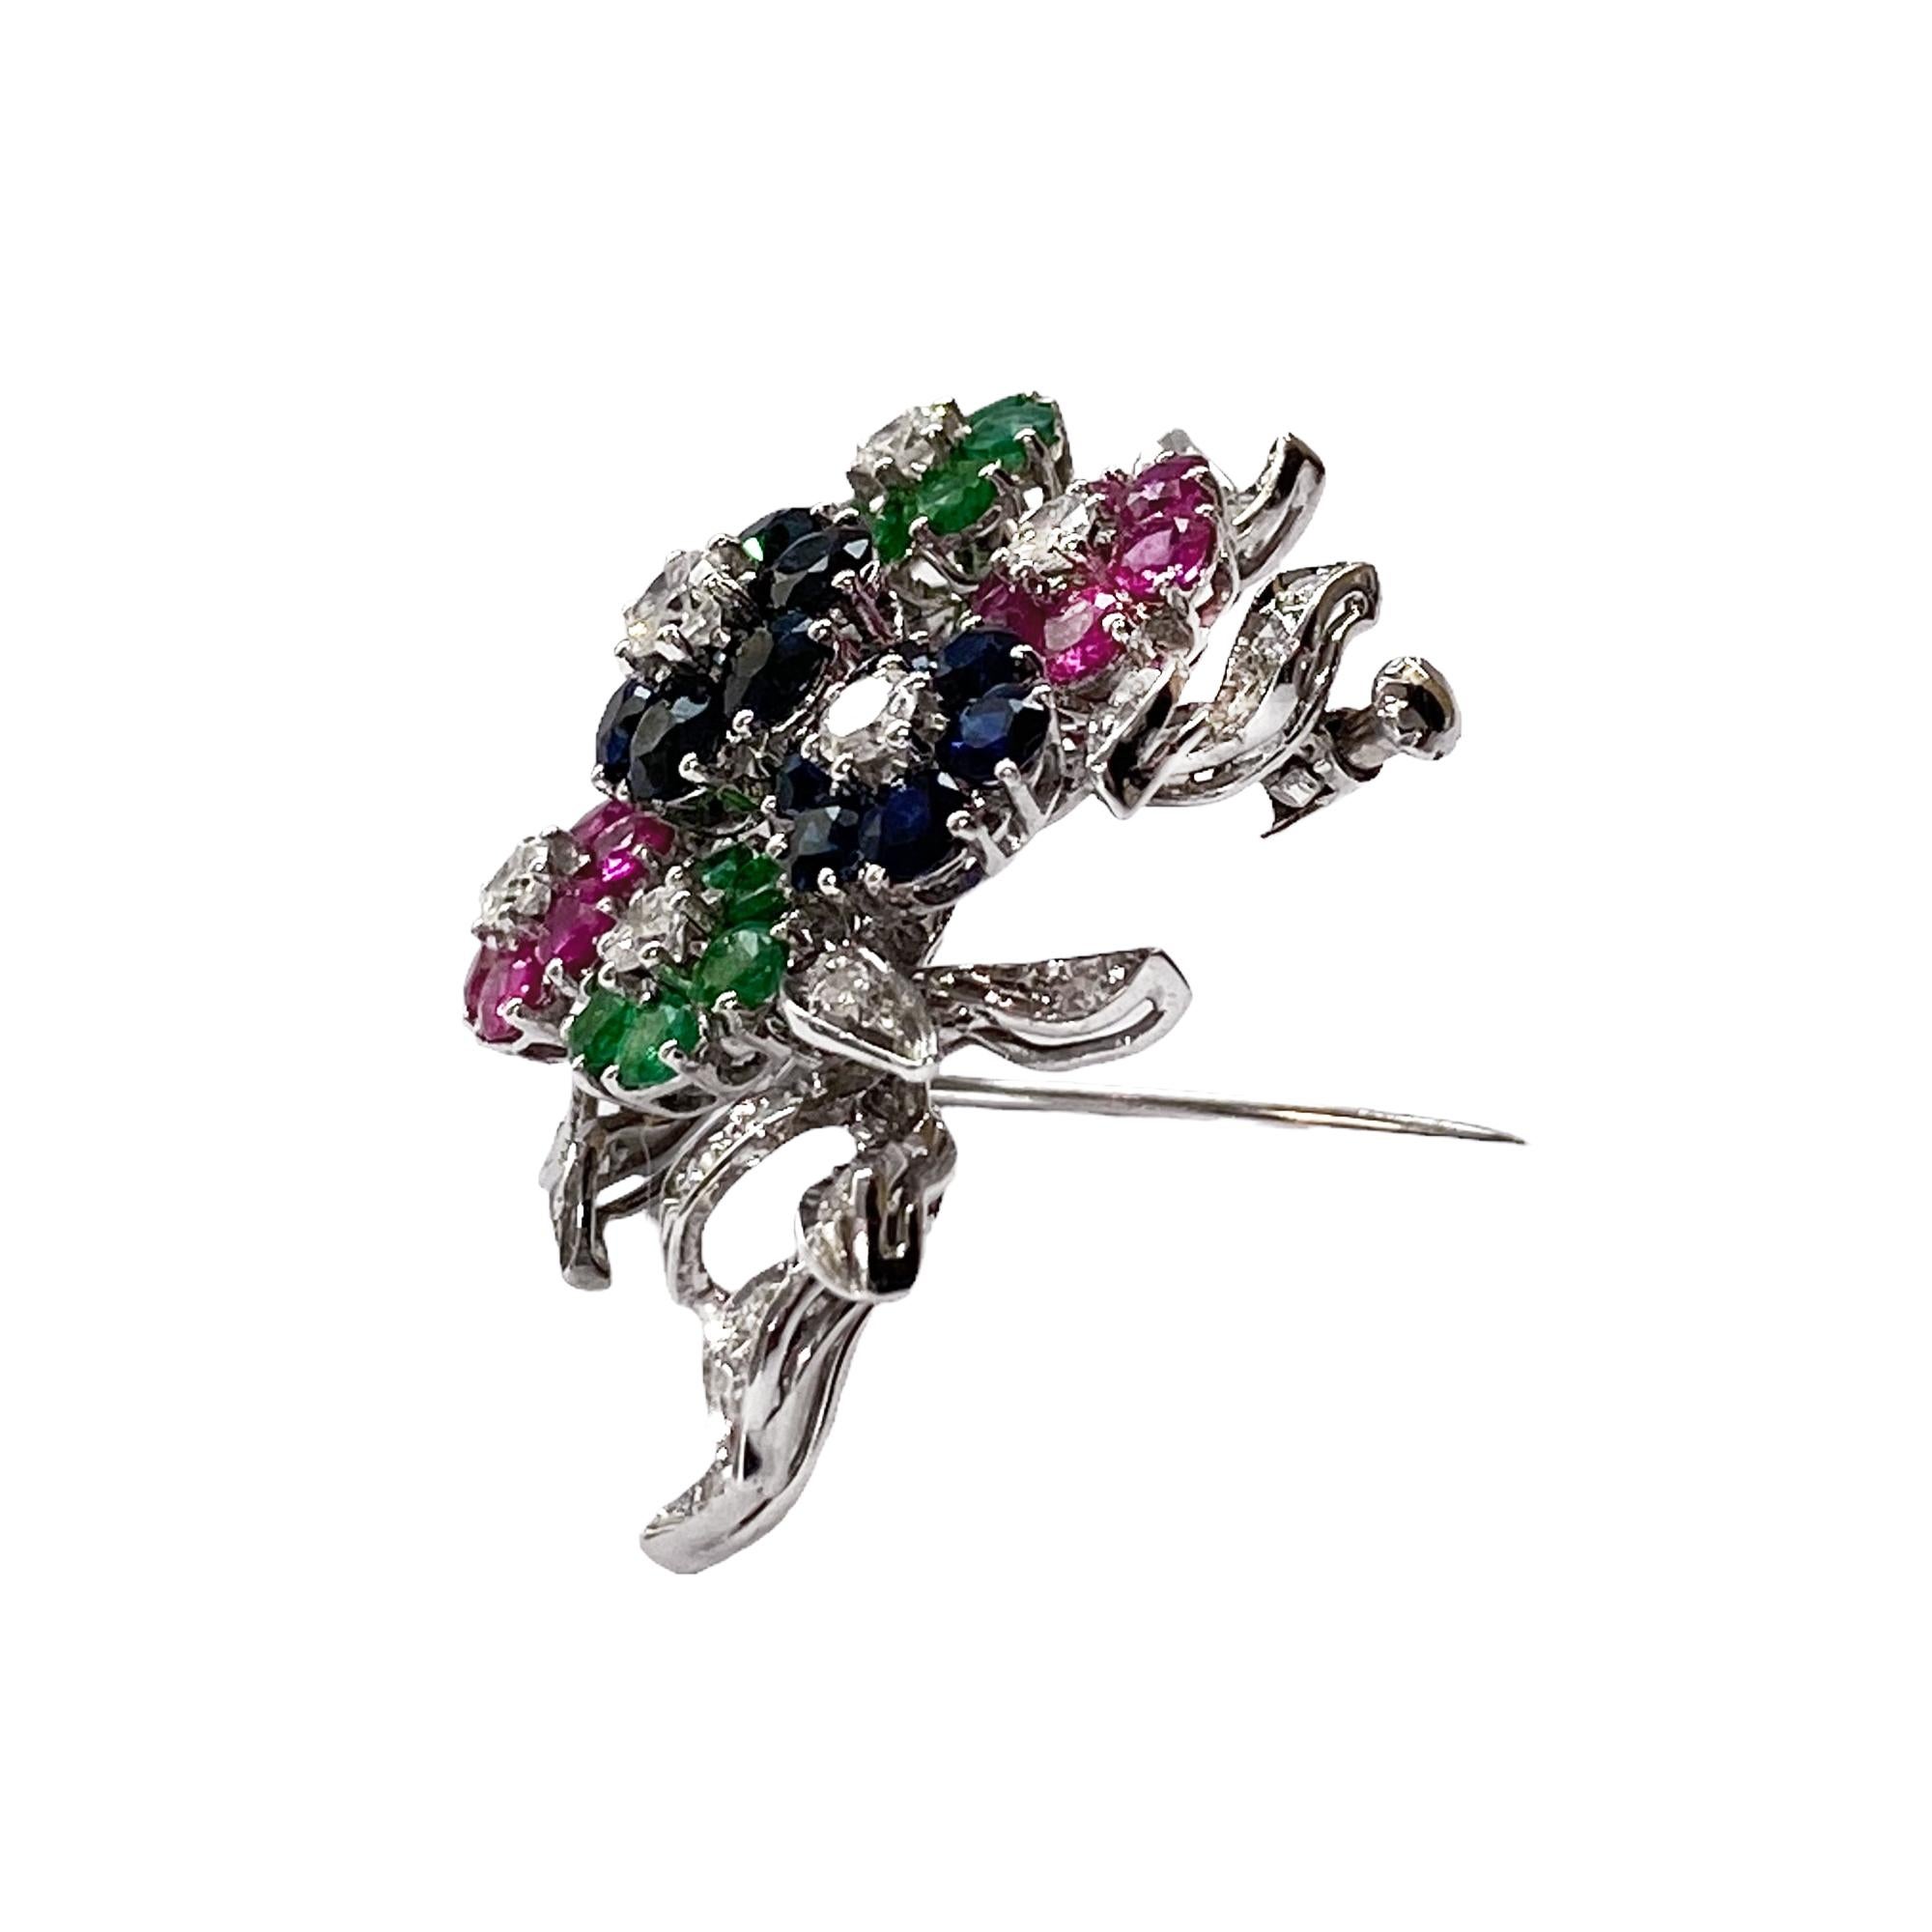 Floral Style Brooch with Diamonds, Rubys, Sapphires, Emeralds, 18kt White Gold In Good Condition For Sale In Vicenza, VI